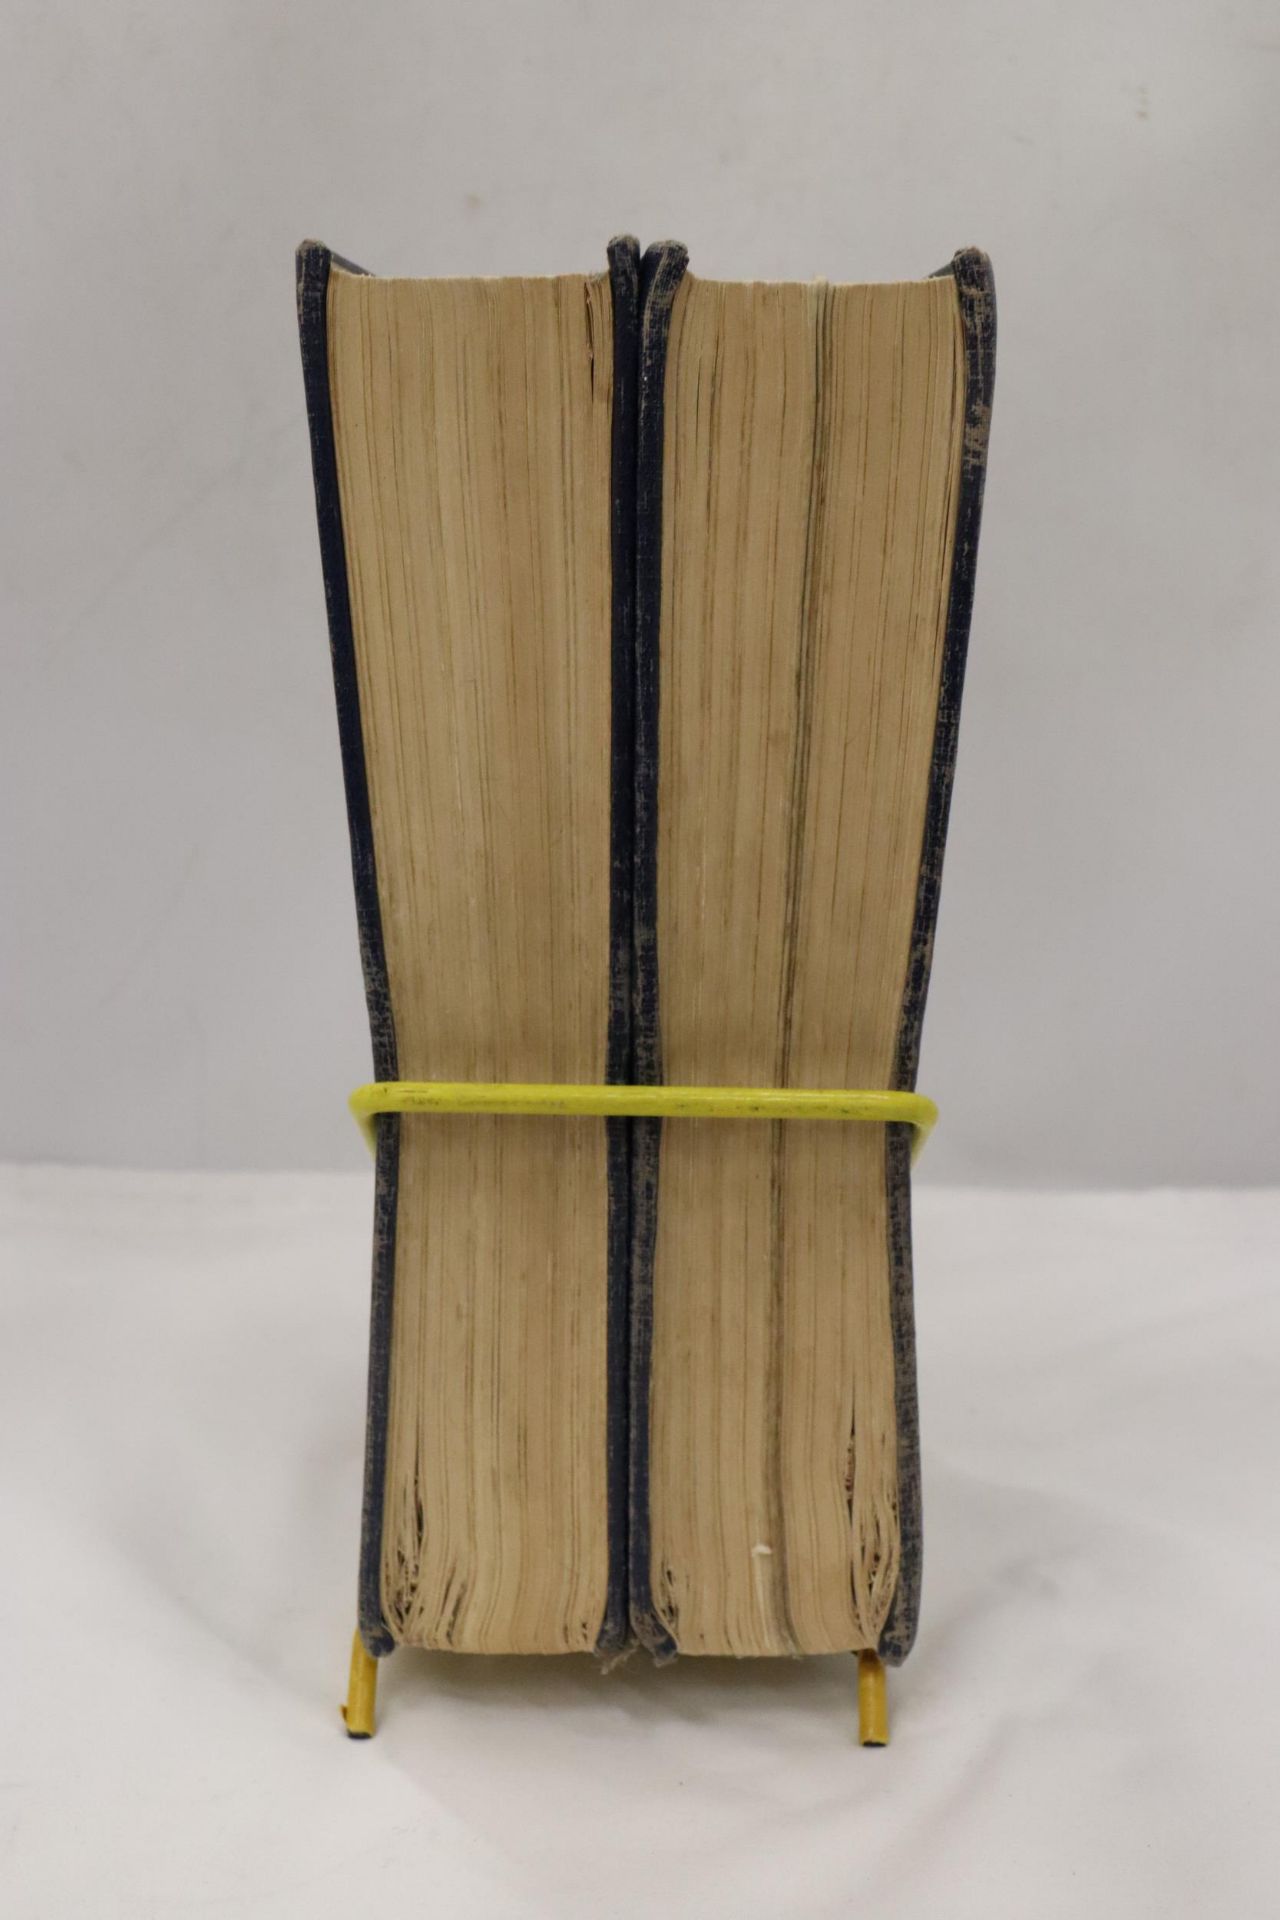 A PAIR OF OXFORD UNIVERSAL DICTIONARY'S IN METAL STAND - Image 3 of 5